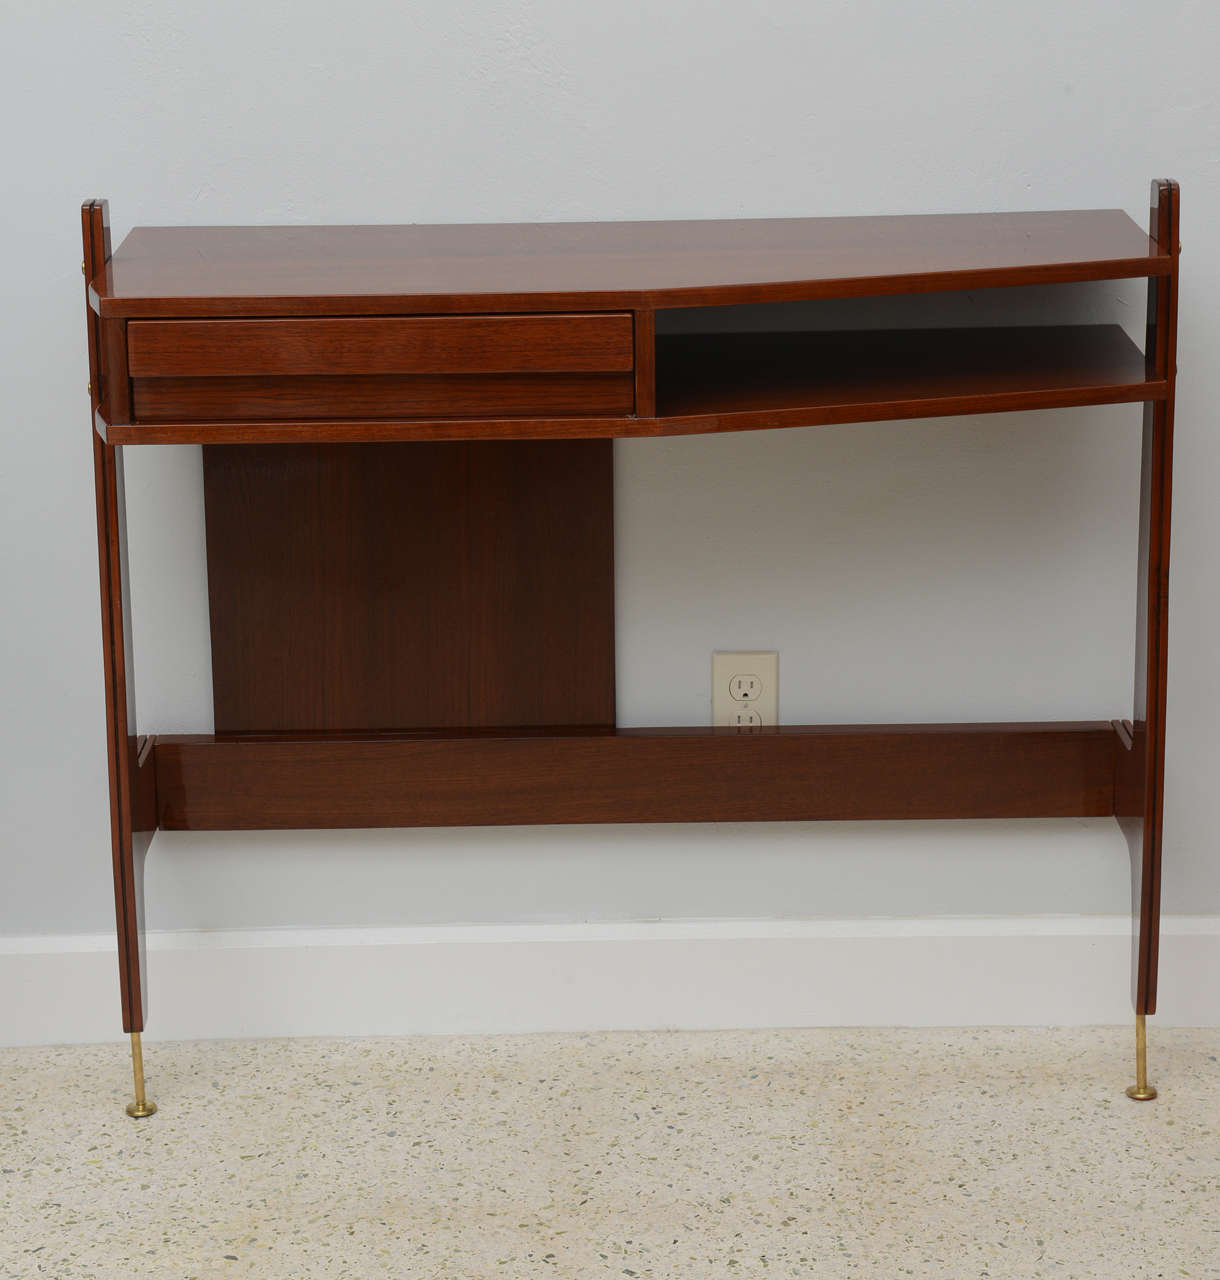 The shaped top above a drawer with a fin pull and conforming lower shelf, with partial back plate and cross stretcher, on brass legs, with tapering legs.